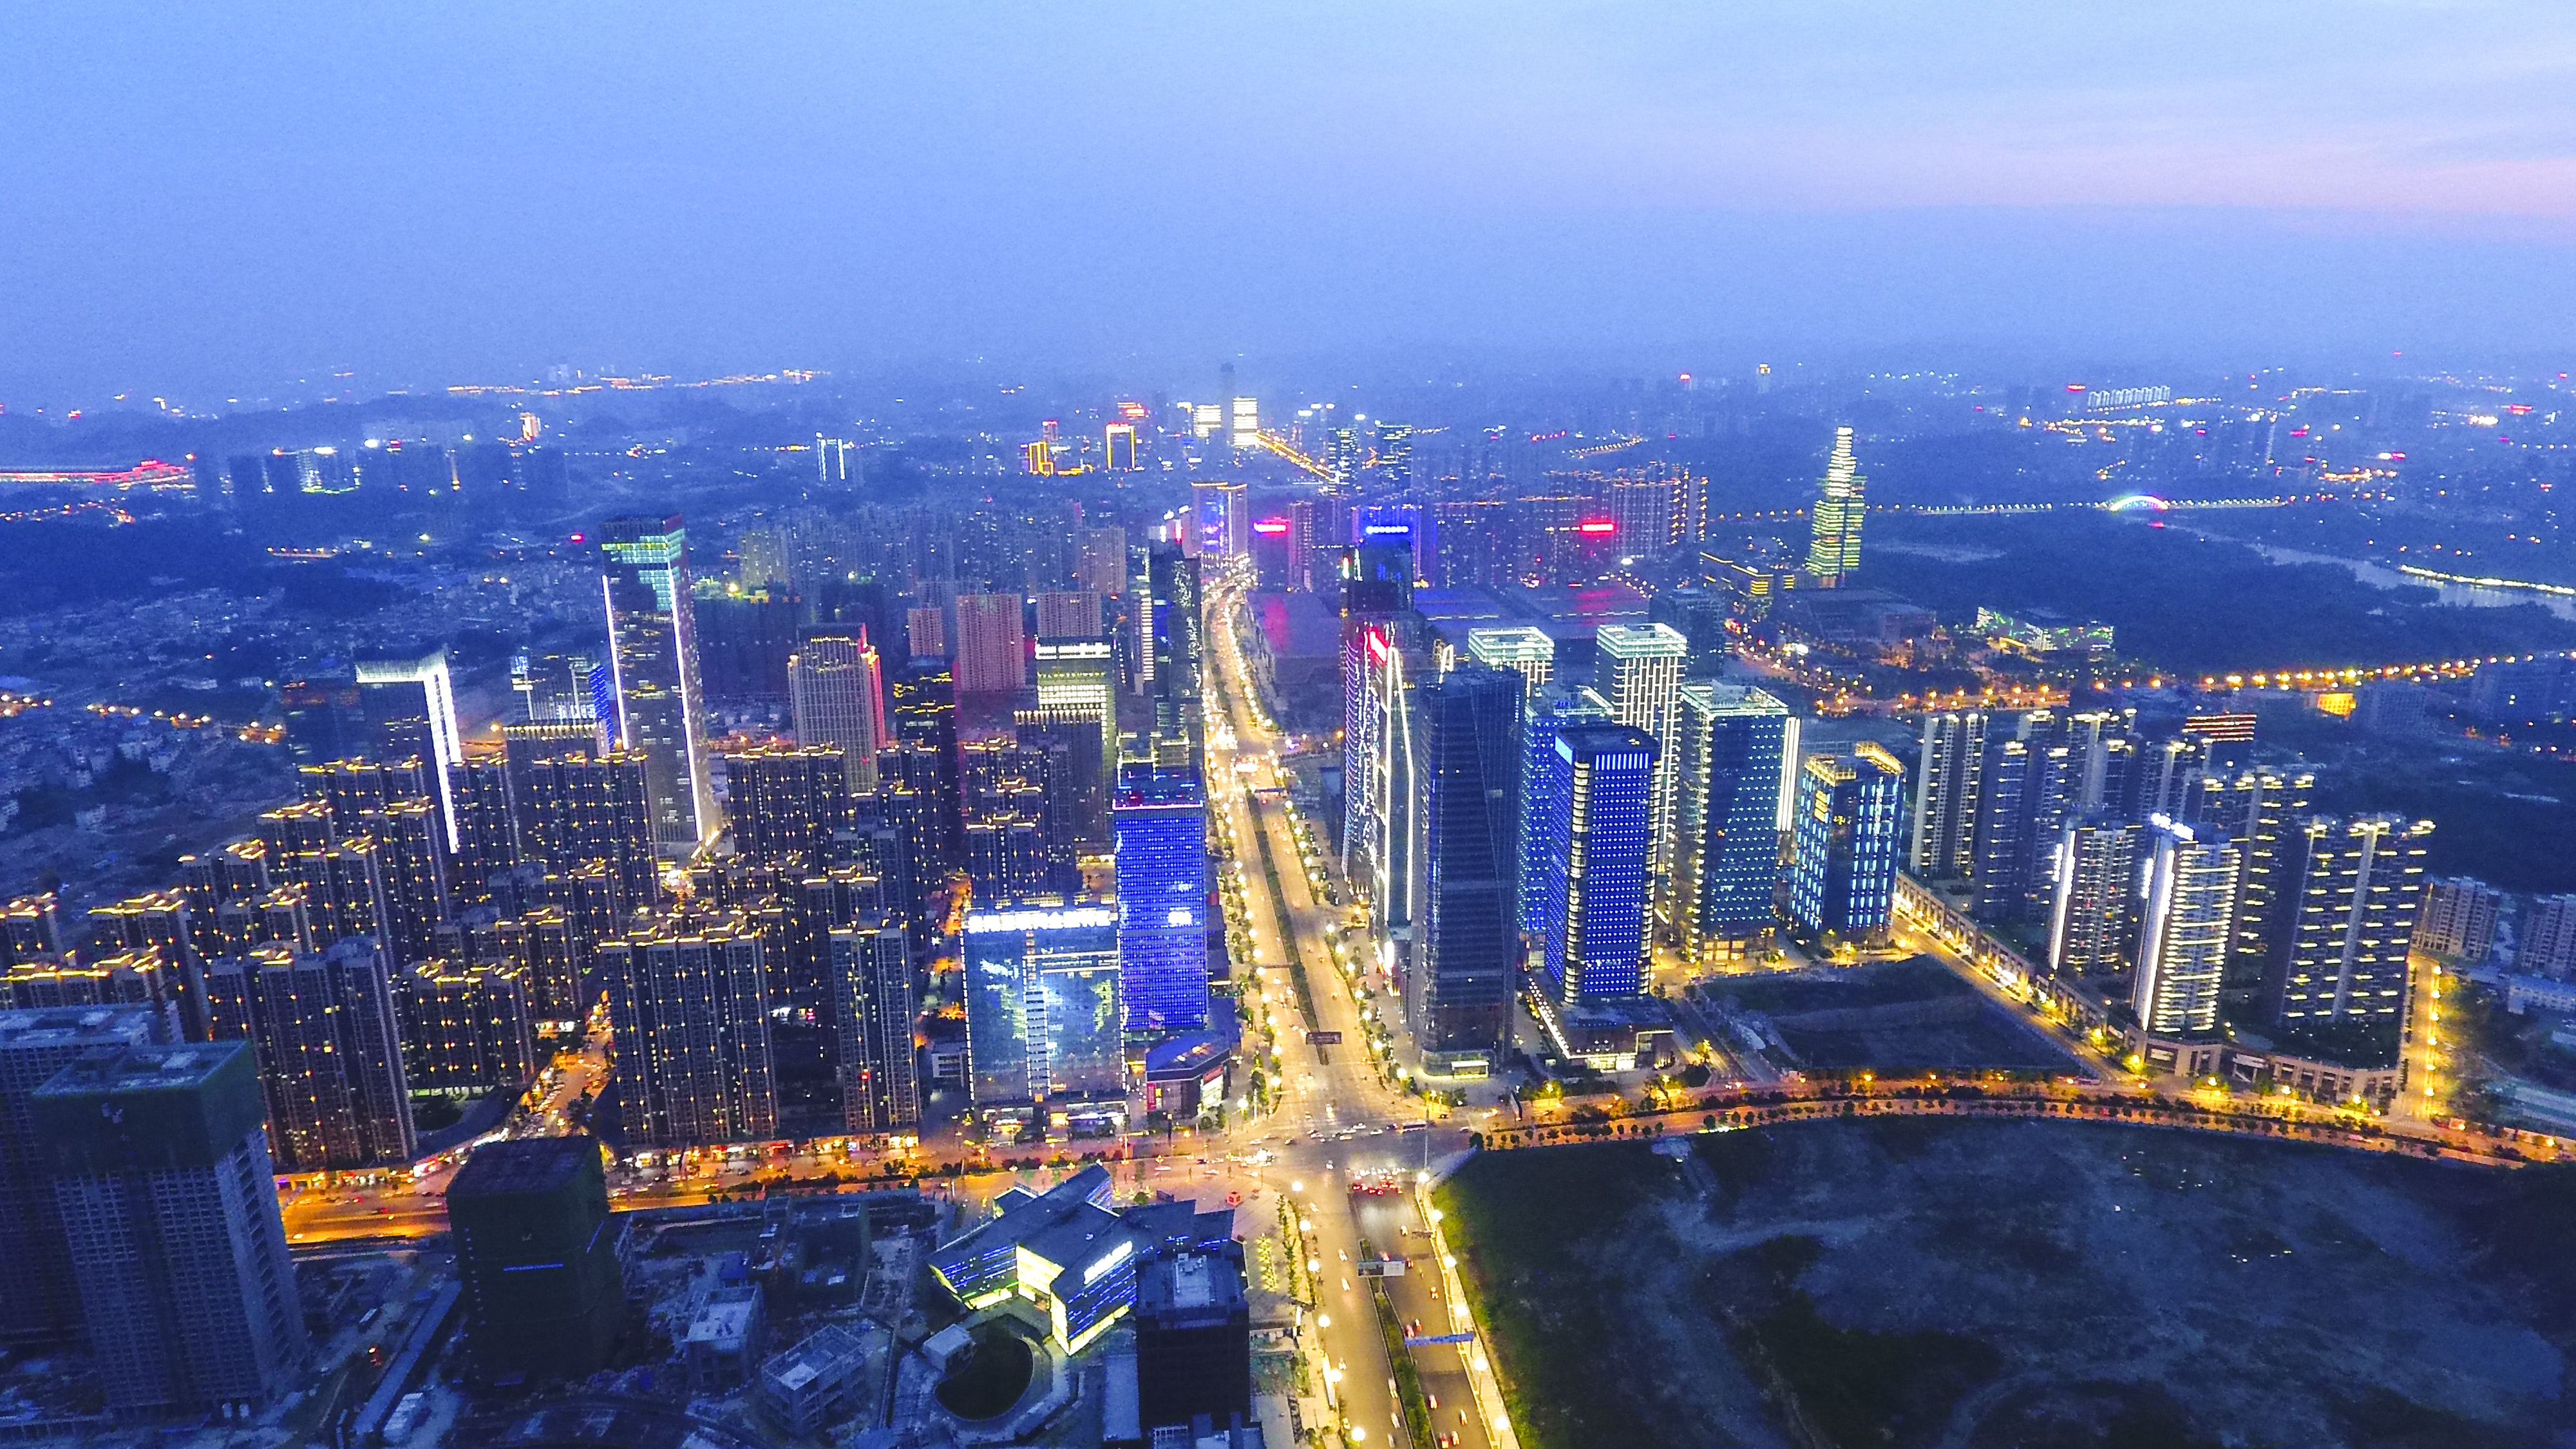 Private economy thrives in Guiyang and Guian